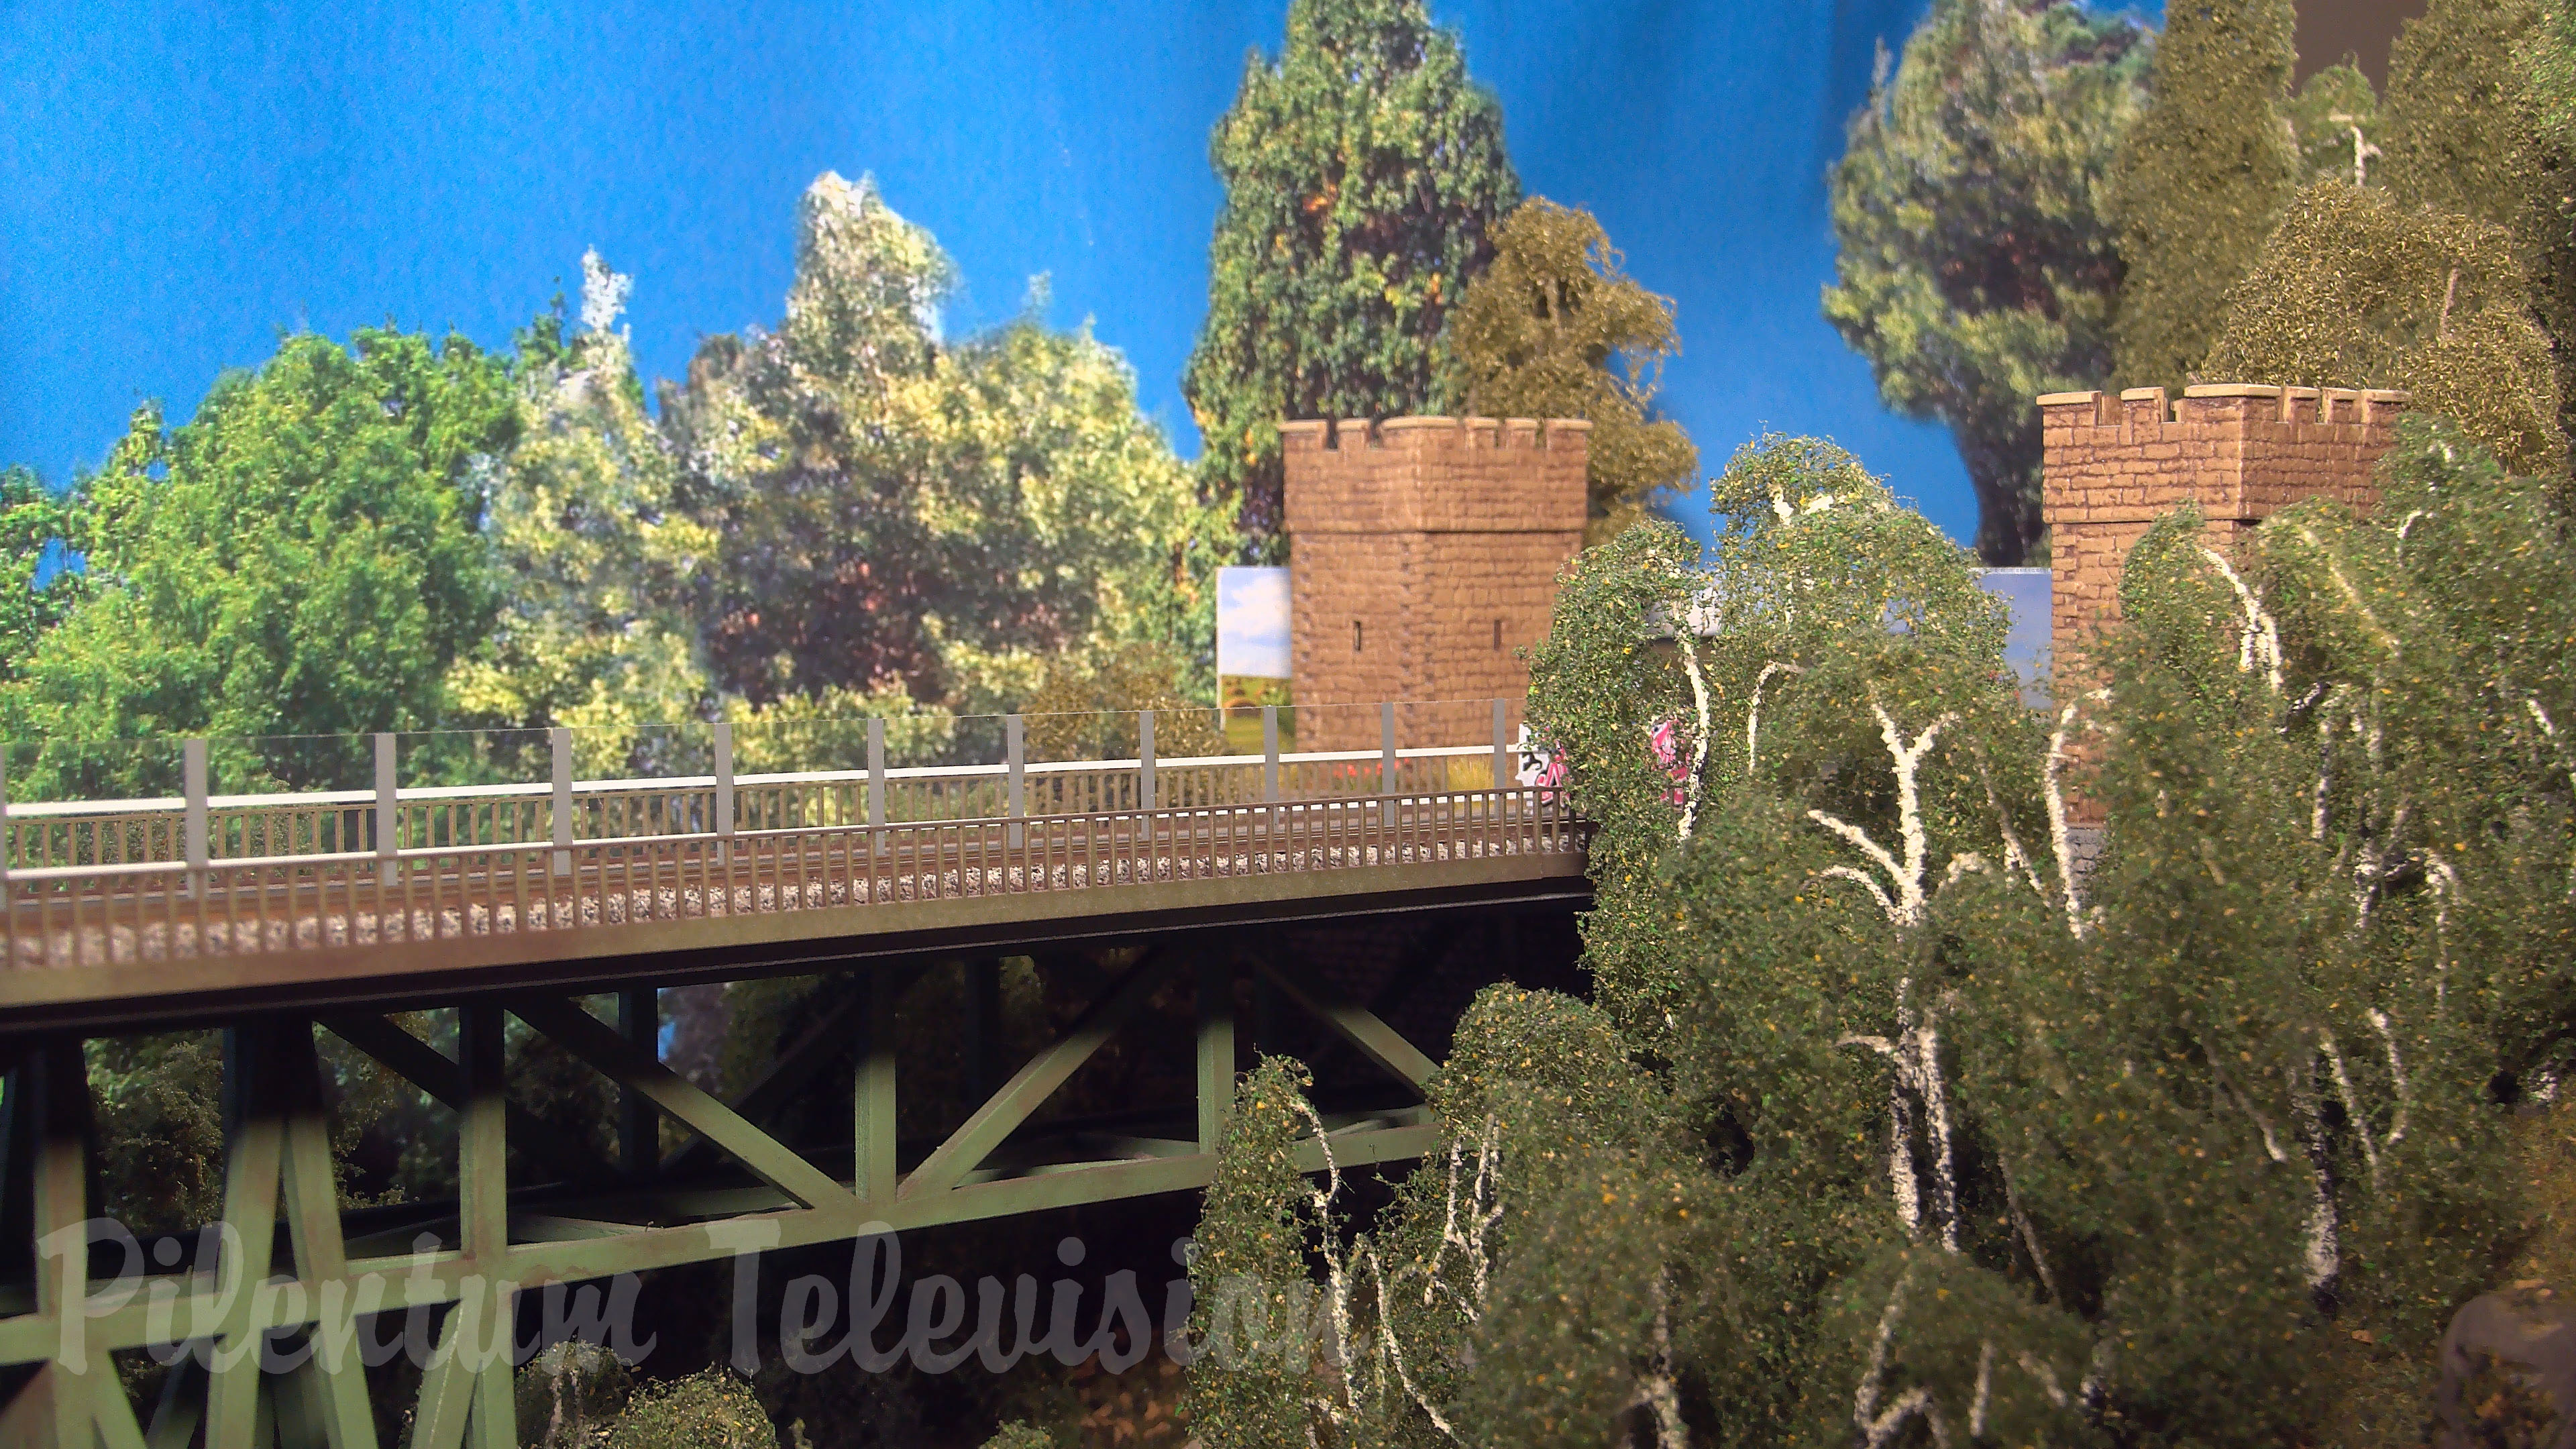 The Highest Railway Bridge of Germany - Modular Model Railroad Layout with TT Scale Trains